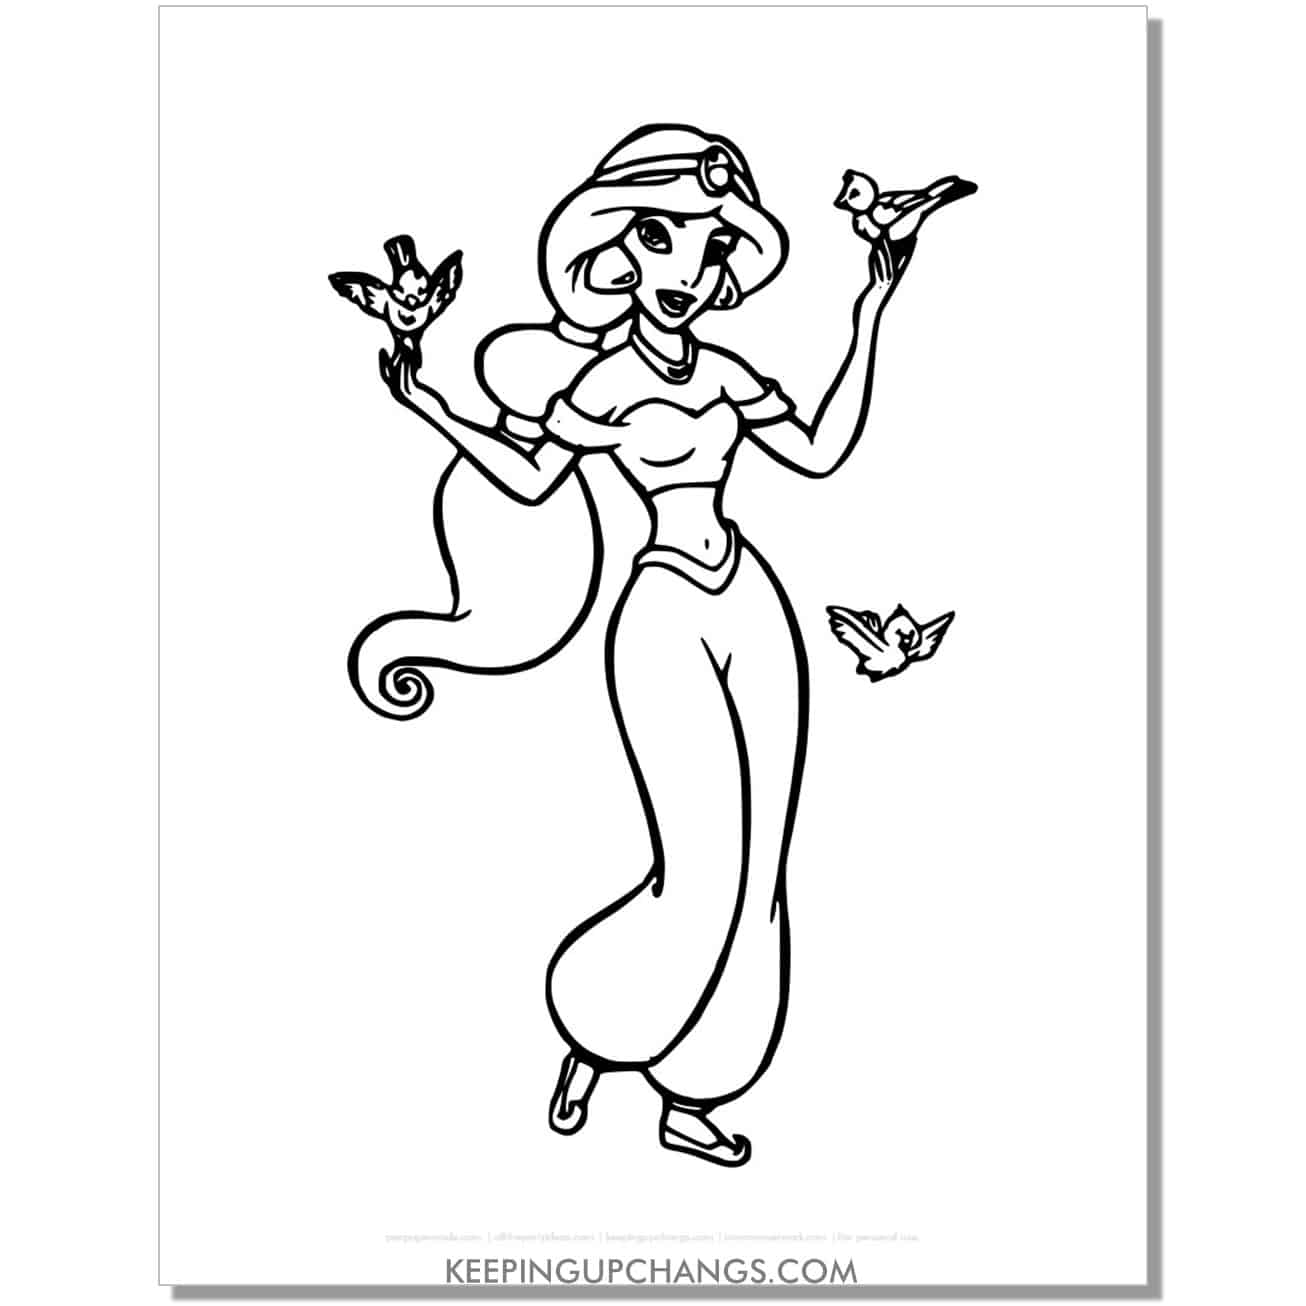 jasmine with birds coloring page, sheet.